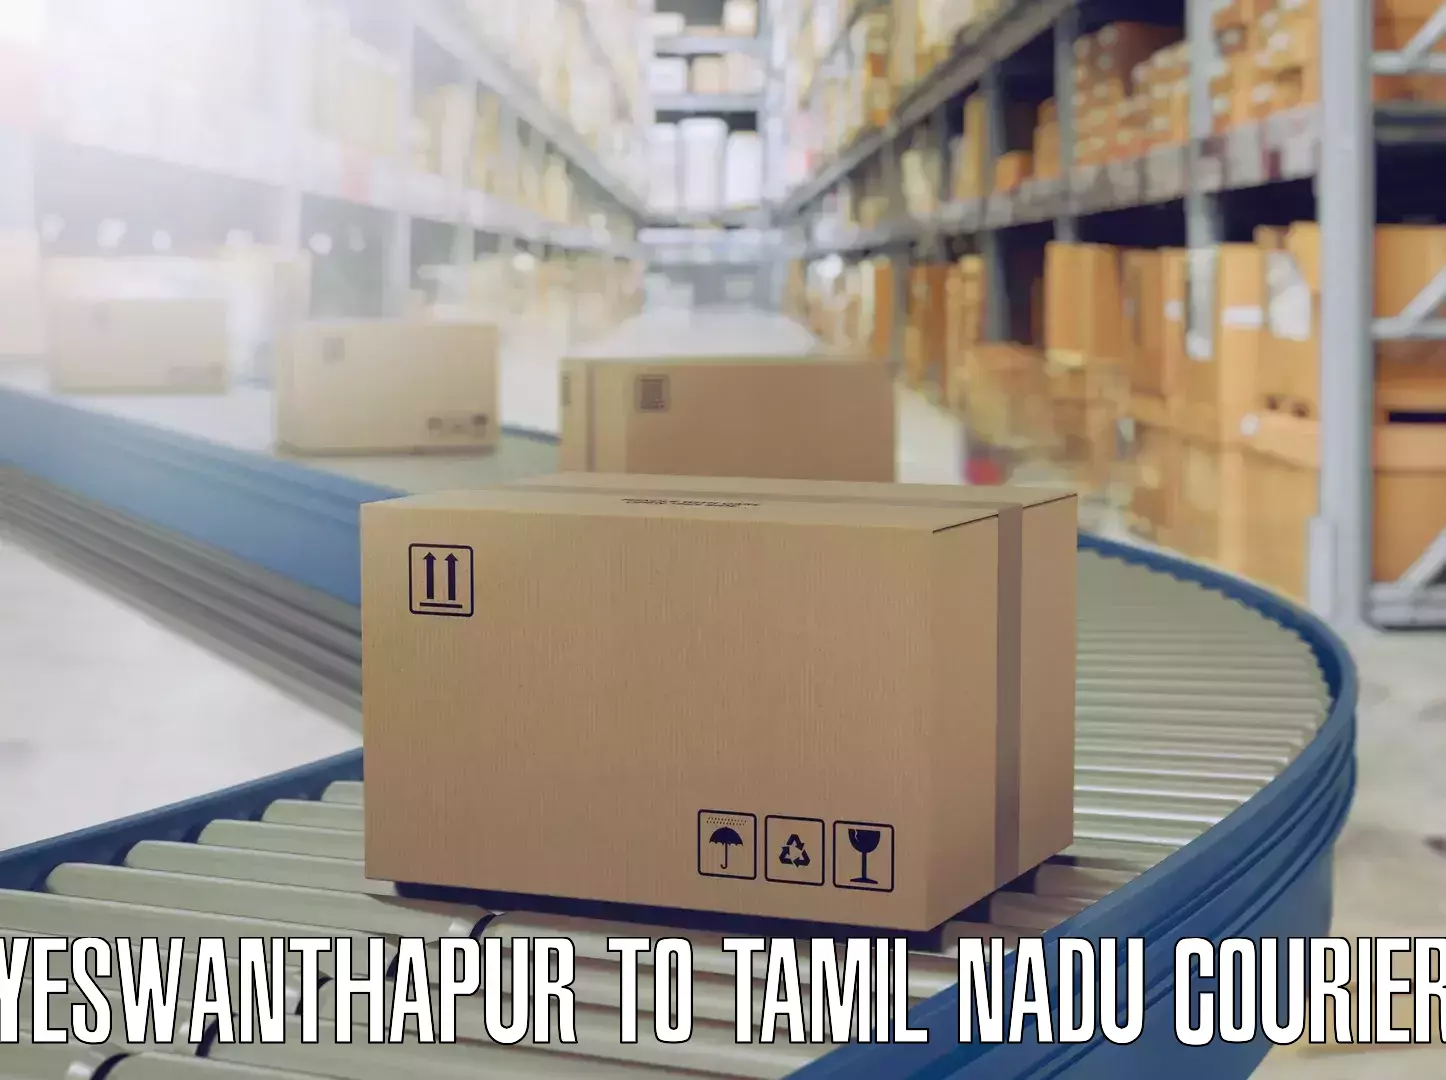 Furniture transport experts Yeswanthapur to Tamil Nadu